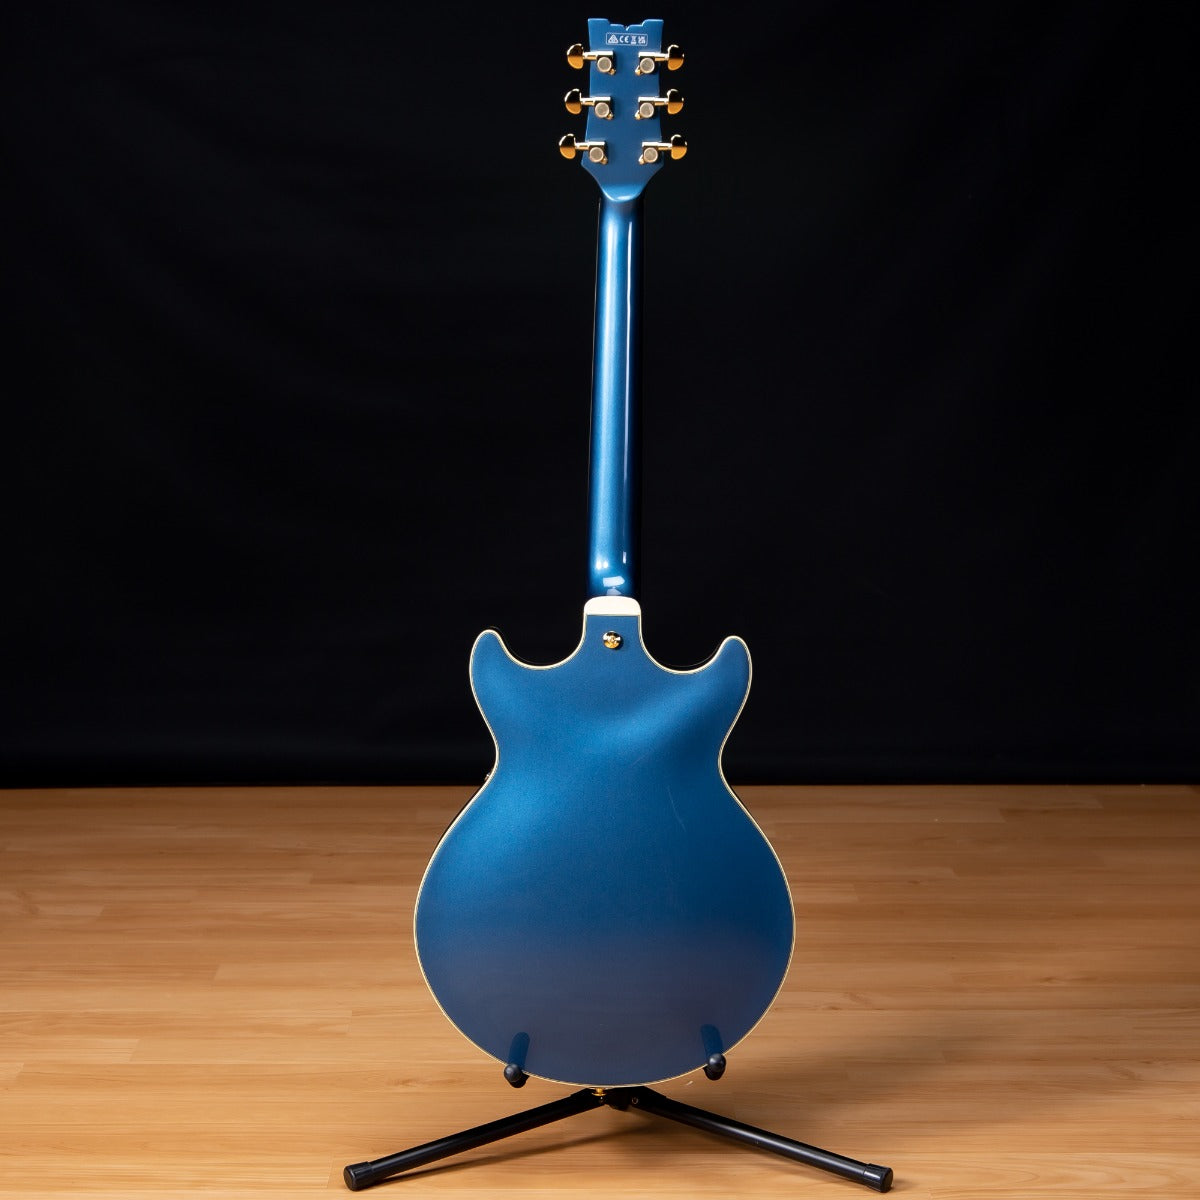 Ibanez AMH90 AM Artcore Expressionist Semi-Hollow Electric Guitar - Prussian Blue Metallic view 11